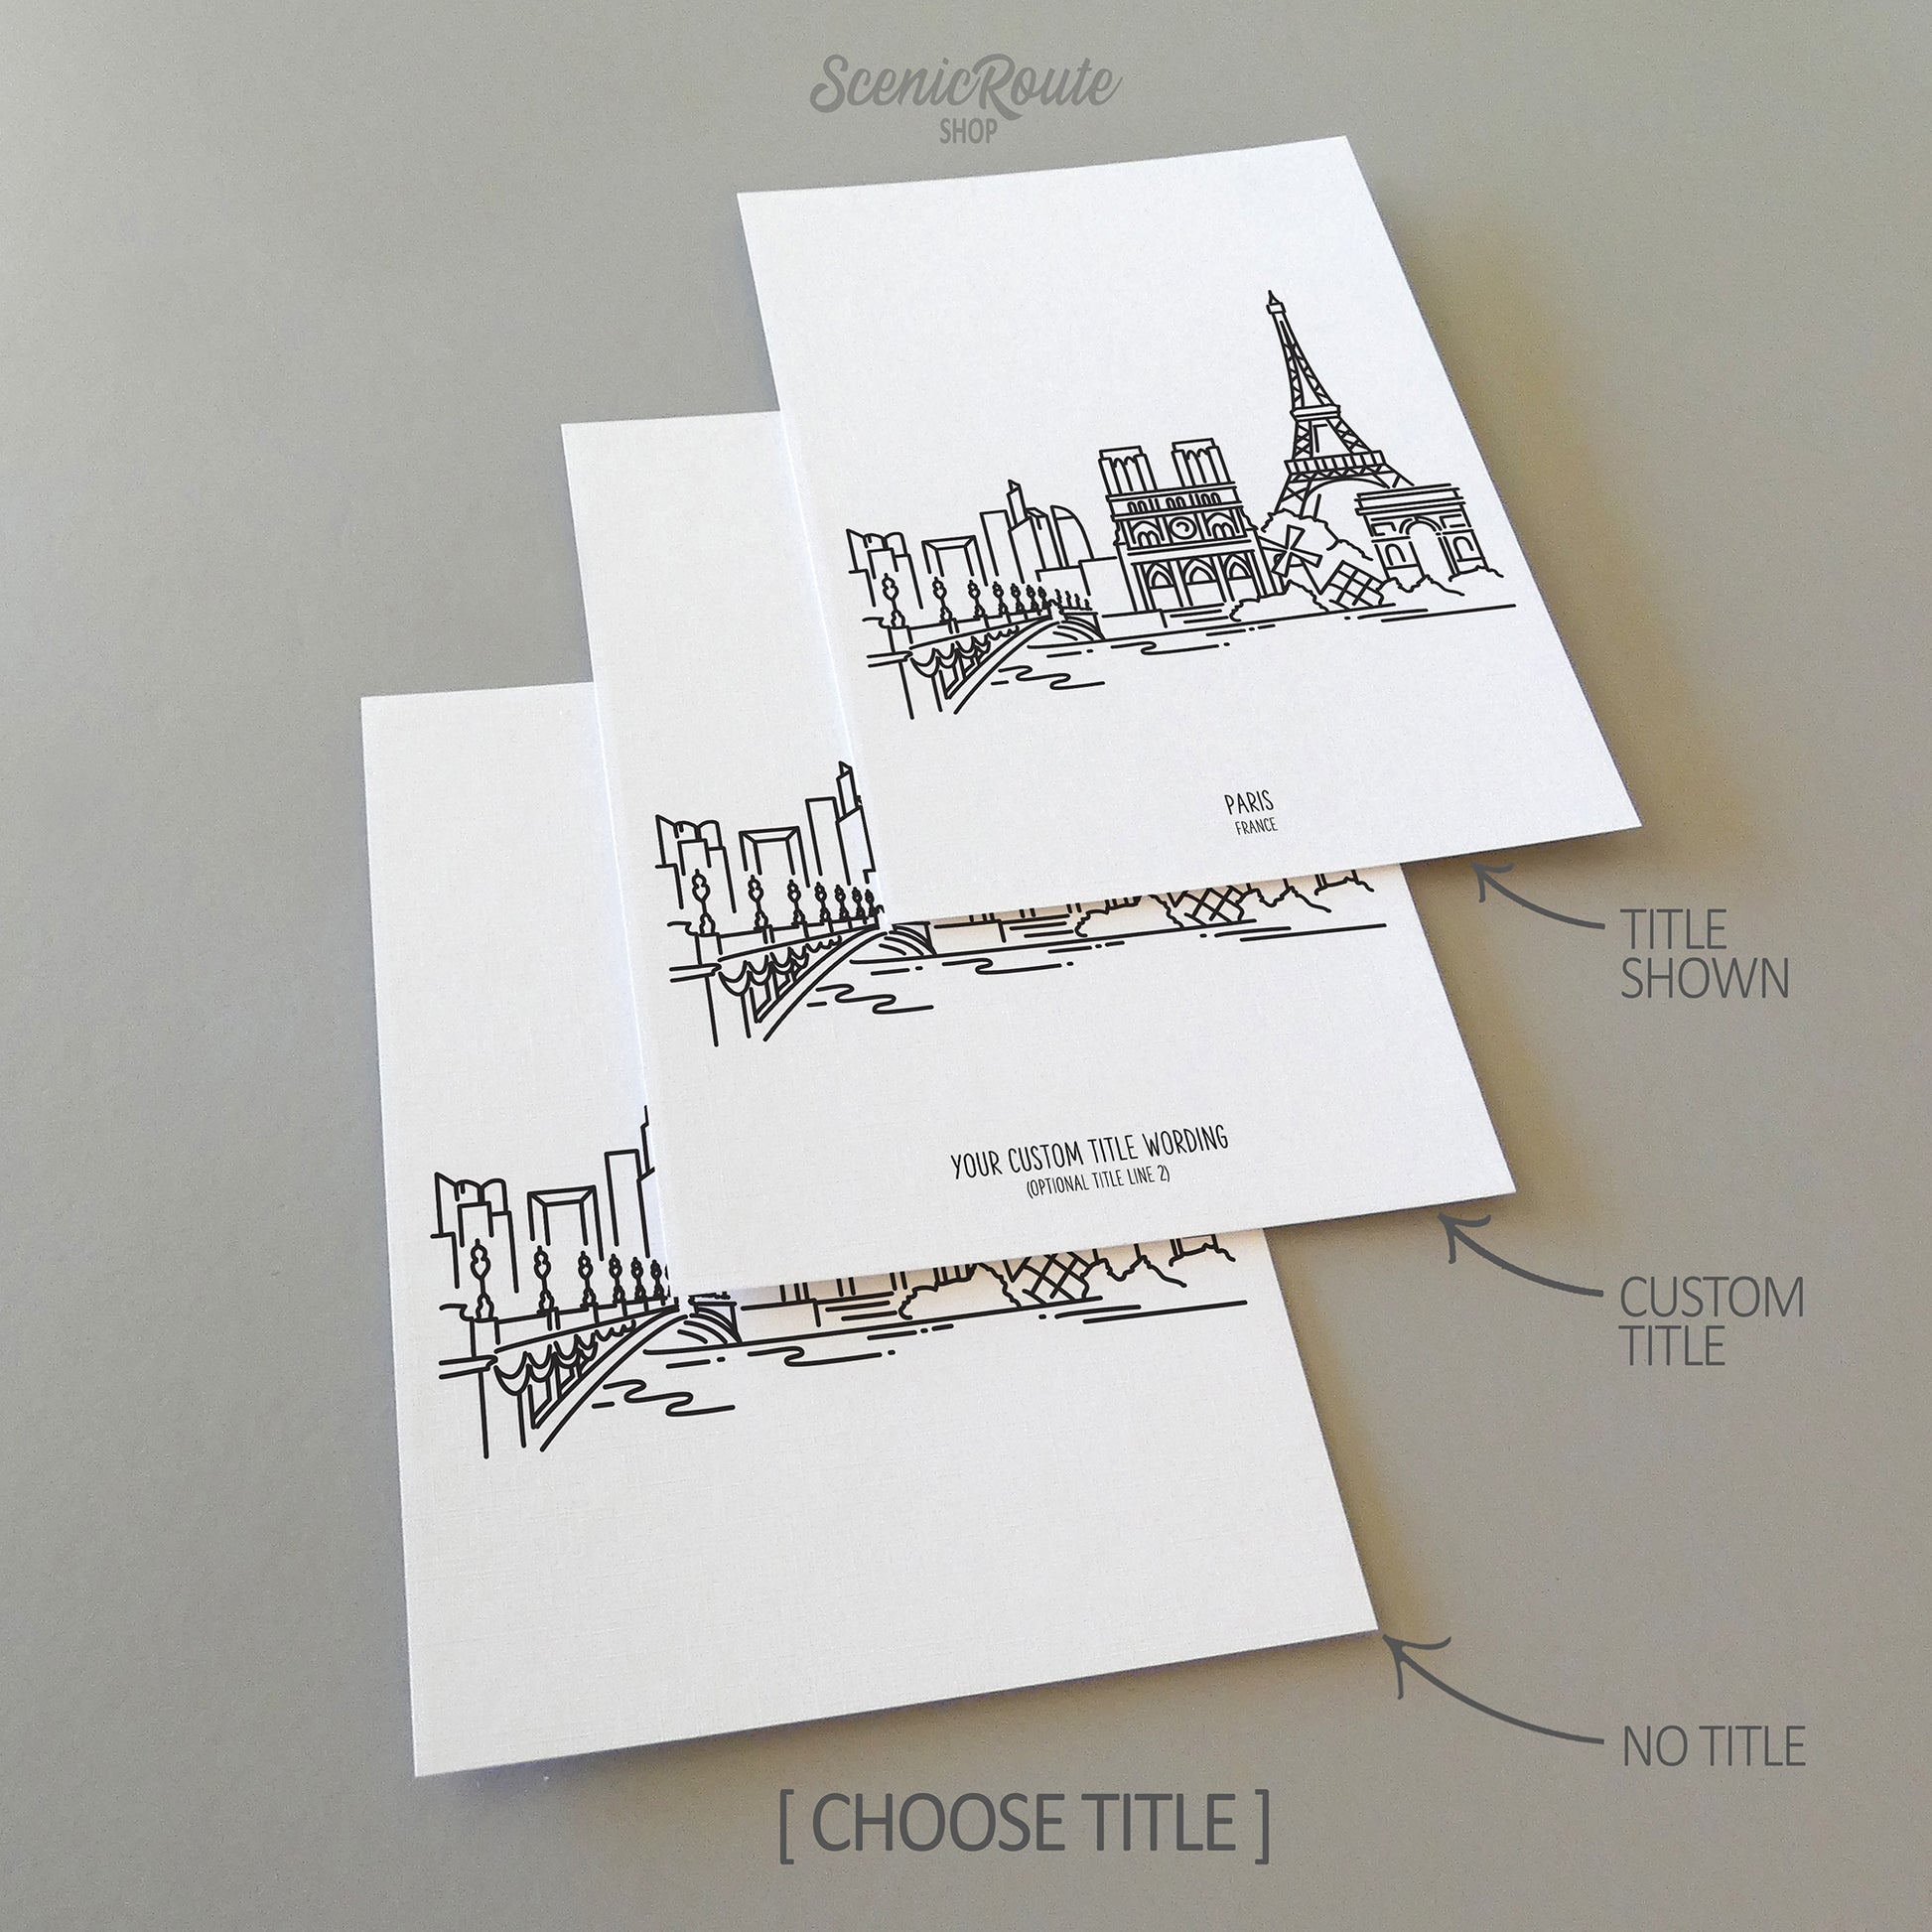 Three line art drawings of the Paris France Skyline on white linen paper with a gray background. The pieces are shown with title options that can be chosen and personalized.